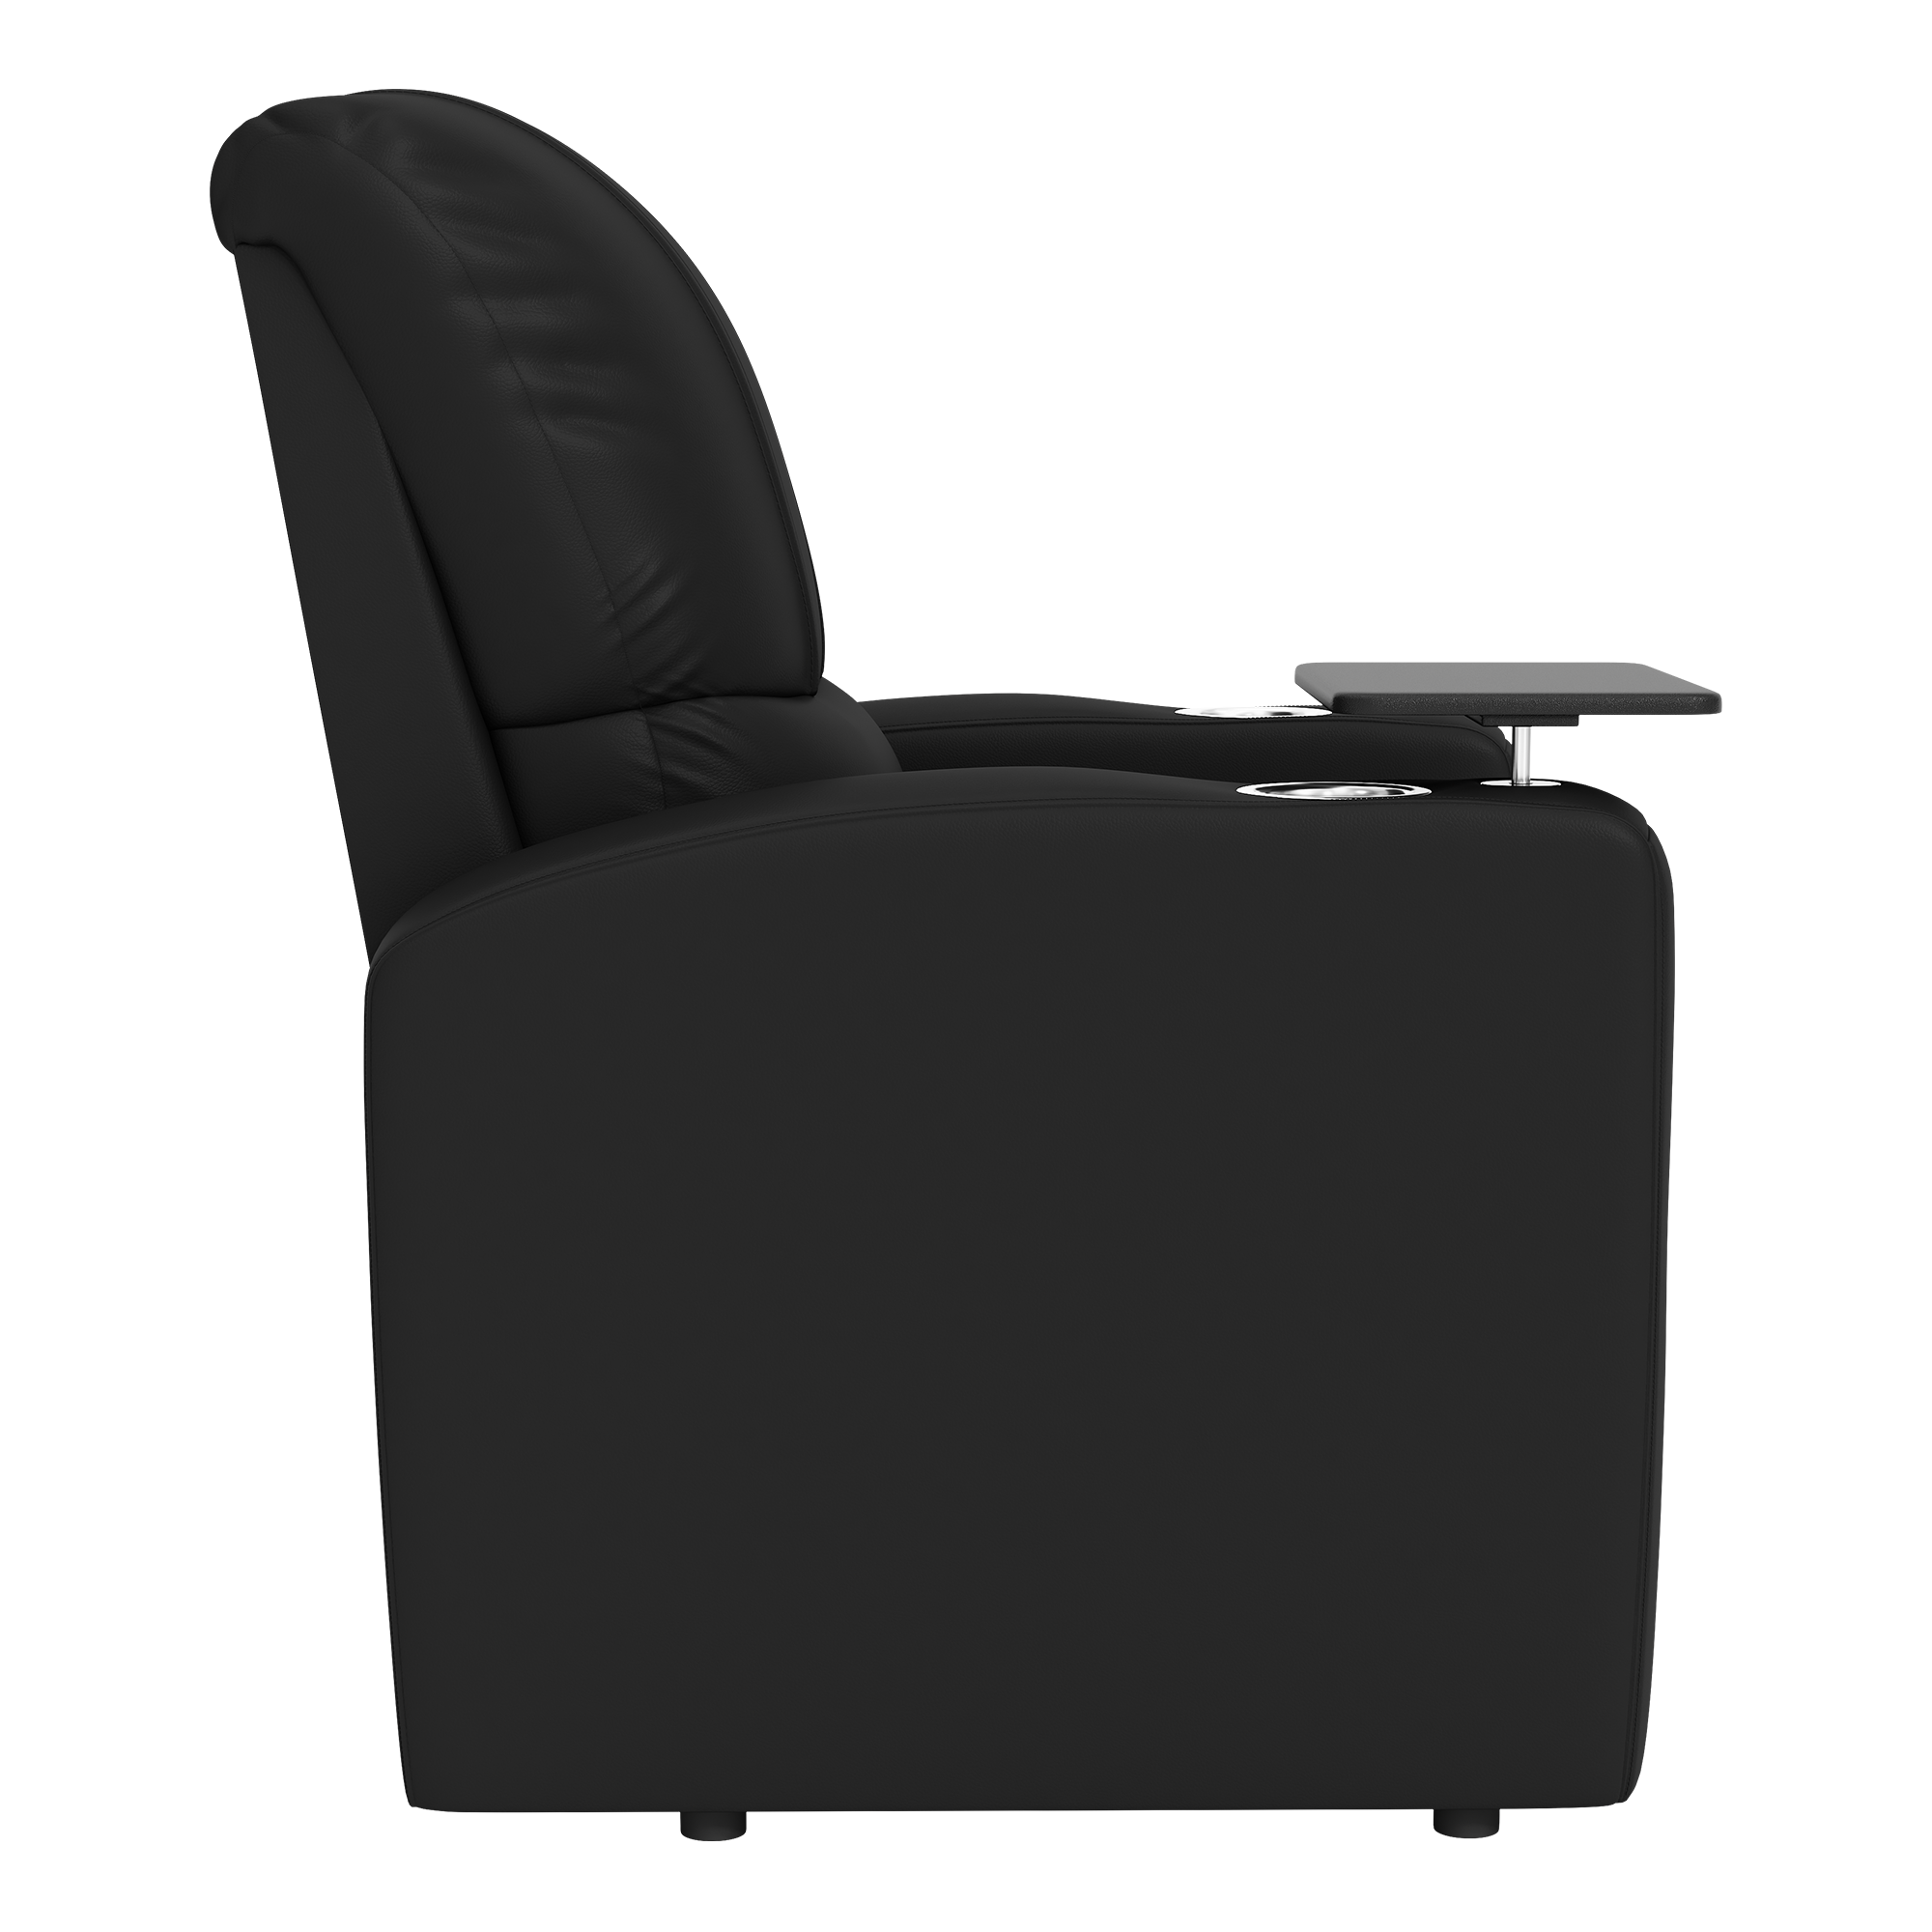 Stealth Power Plus Recliner with Florida Marlins Cooperstown Primary